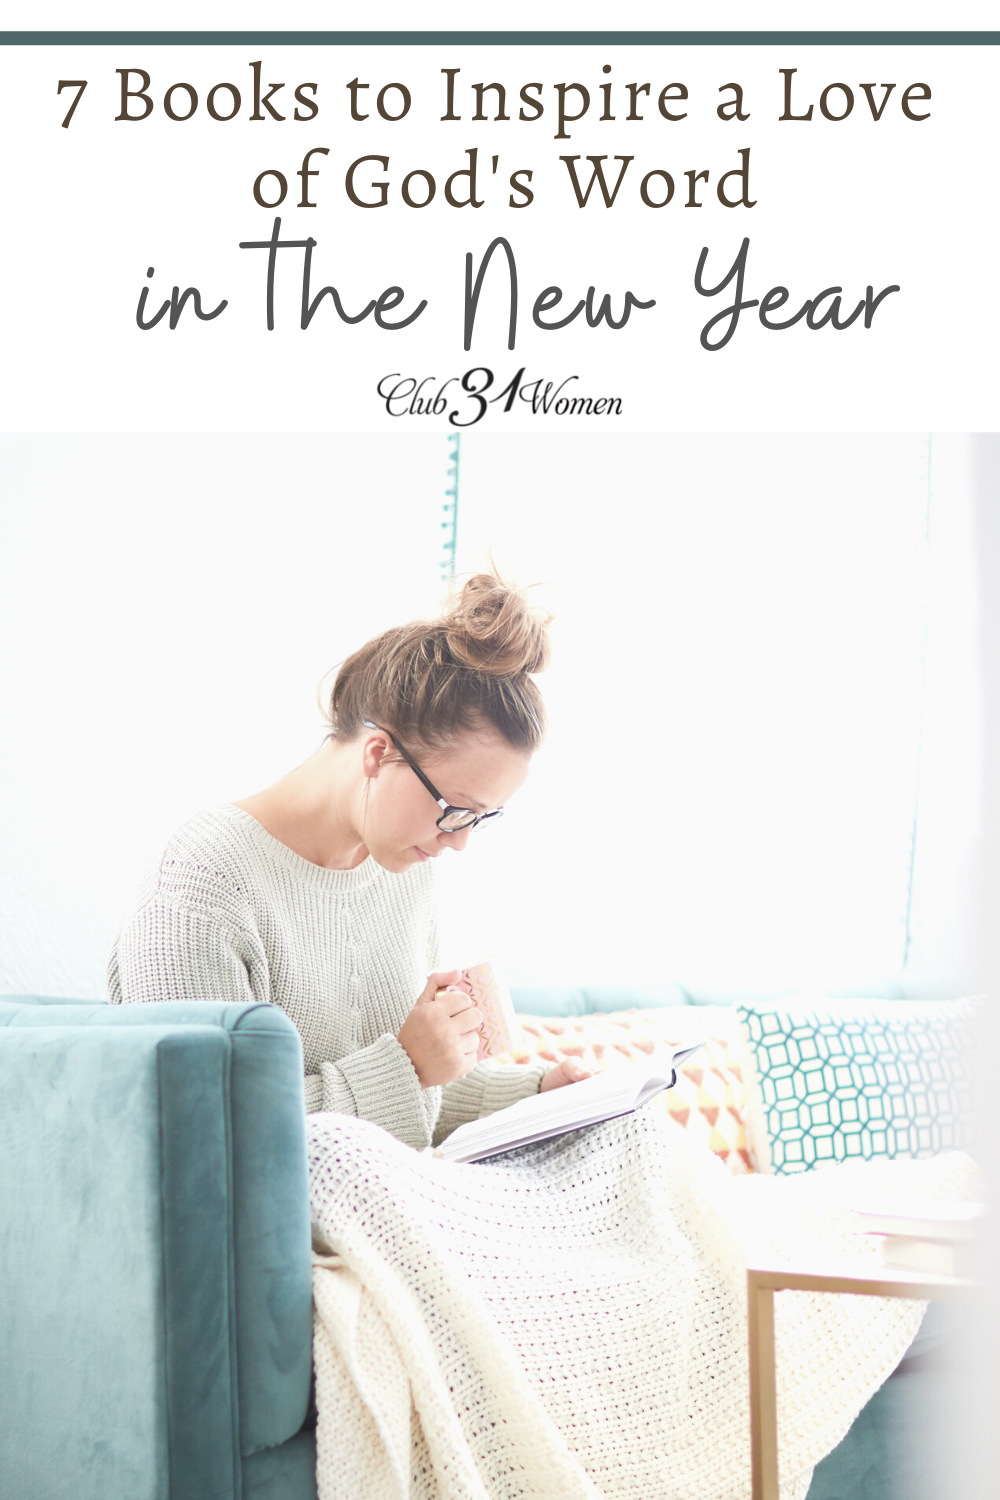 It is always a good idea to learn new, fresh ways to explore God’s Word, but the dawning of a new year seems like an apt time to get back to the Bible. via @Club31Women